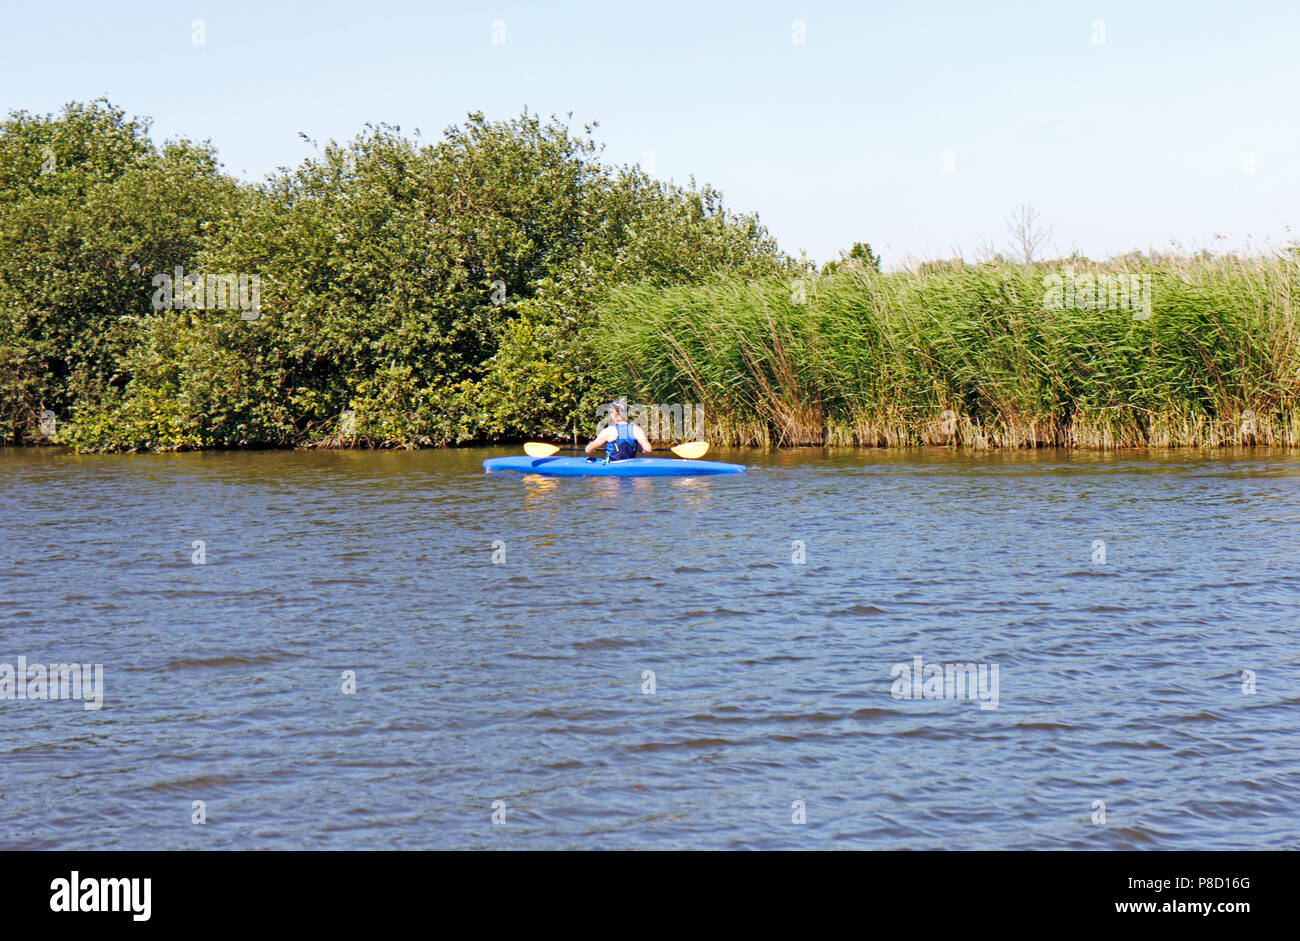 A canoeist on the River Bure on the Norfolk Broads at Horning, Norfolk, England, United Kingdom, Europe. Stock Photo